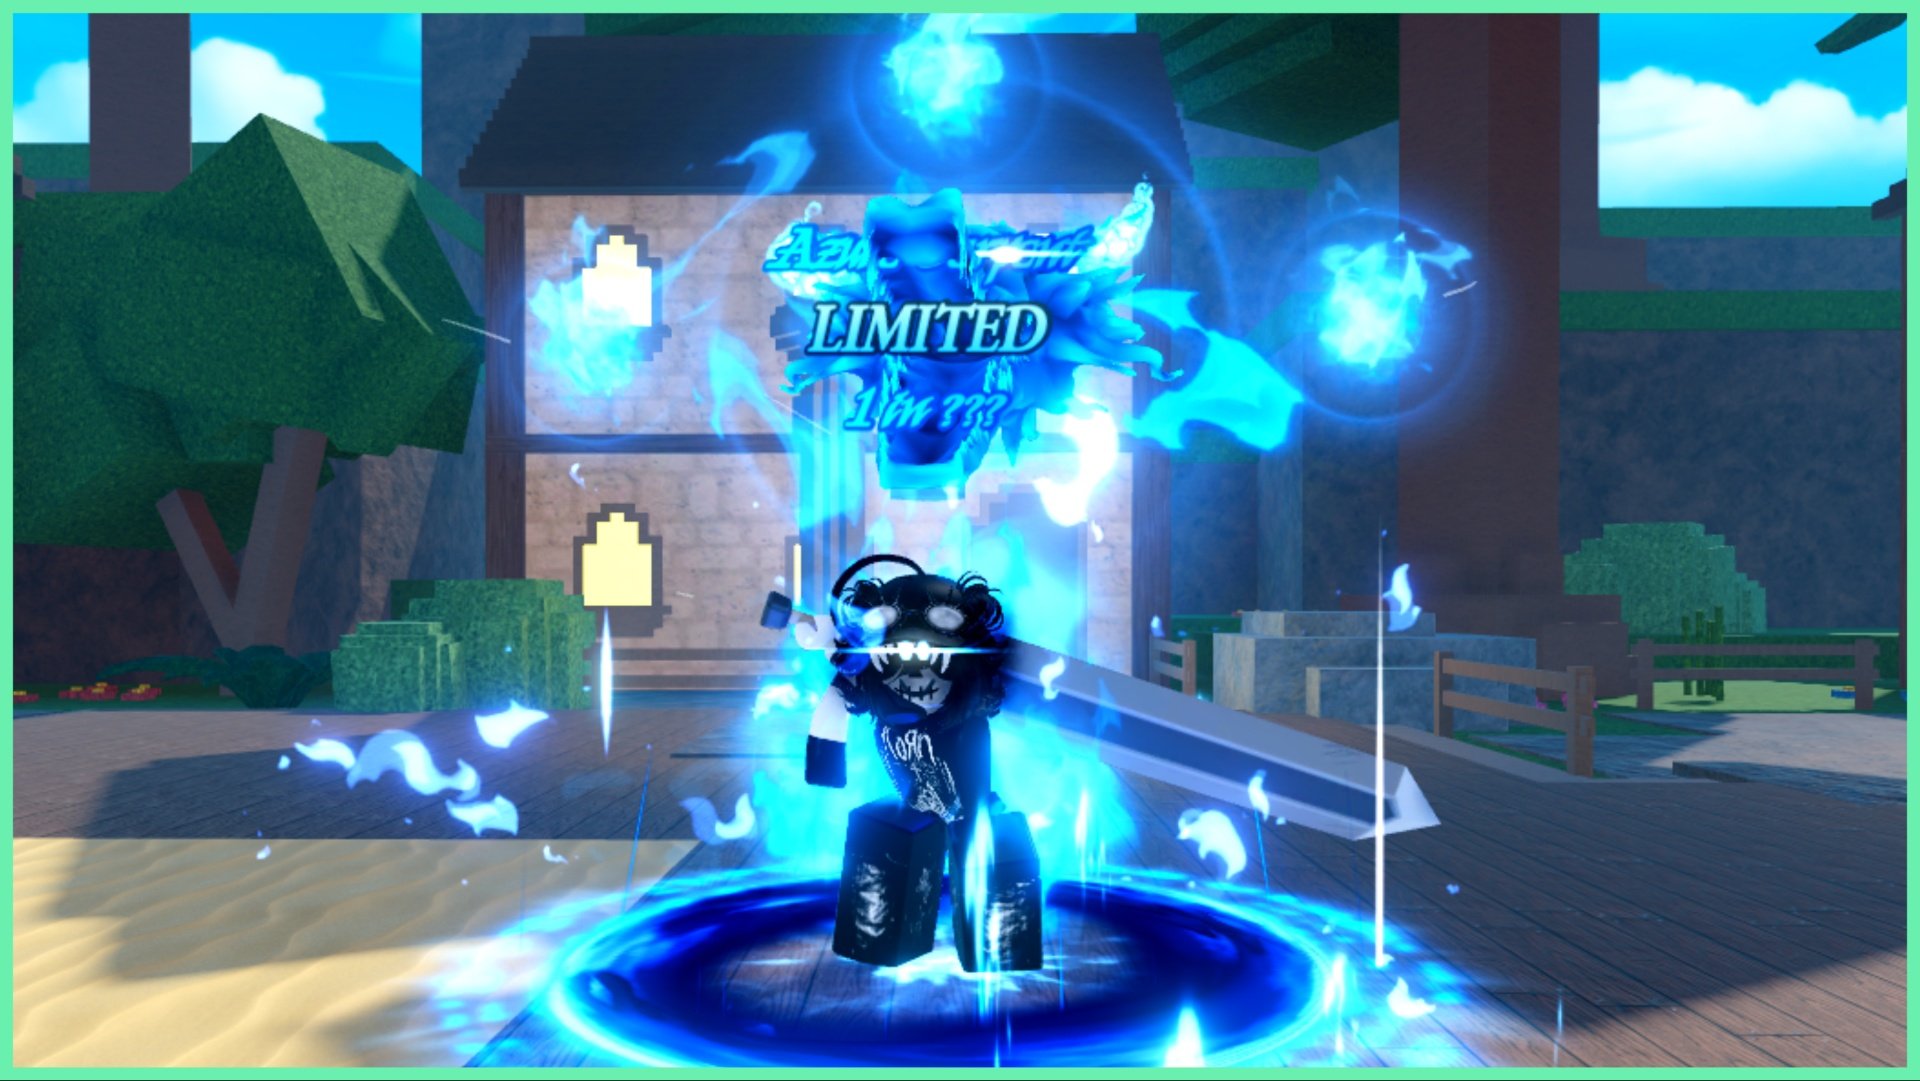 The image shows my avatar in a crouch with a large claymore blade behind her in an "ready to attack" pose. Surrounding her feet are deep blue swirls aura which spit into the air into little blue orbs and finally a massive blue dragon head behind her